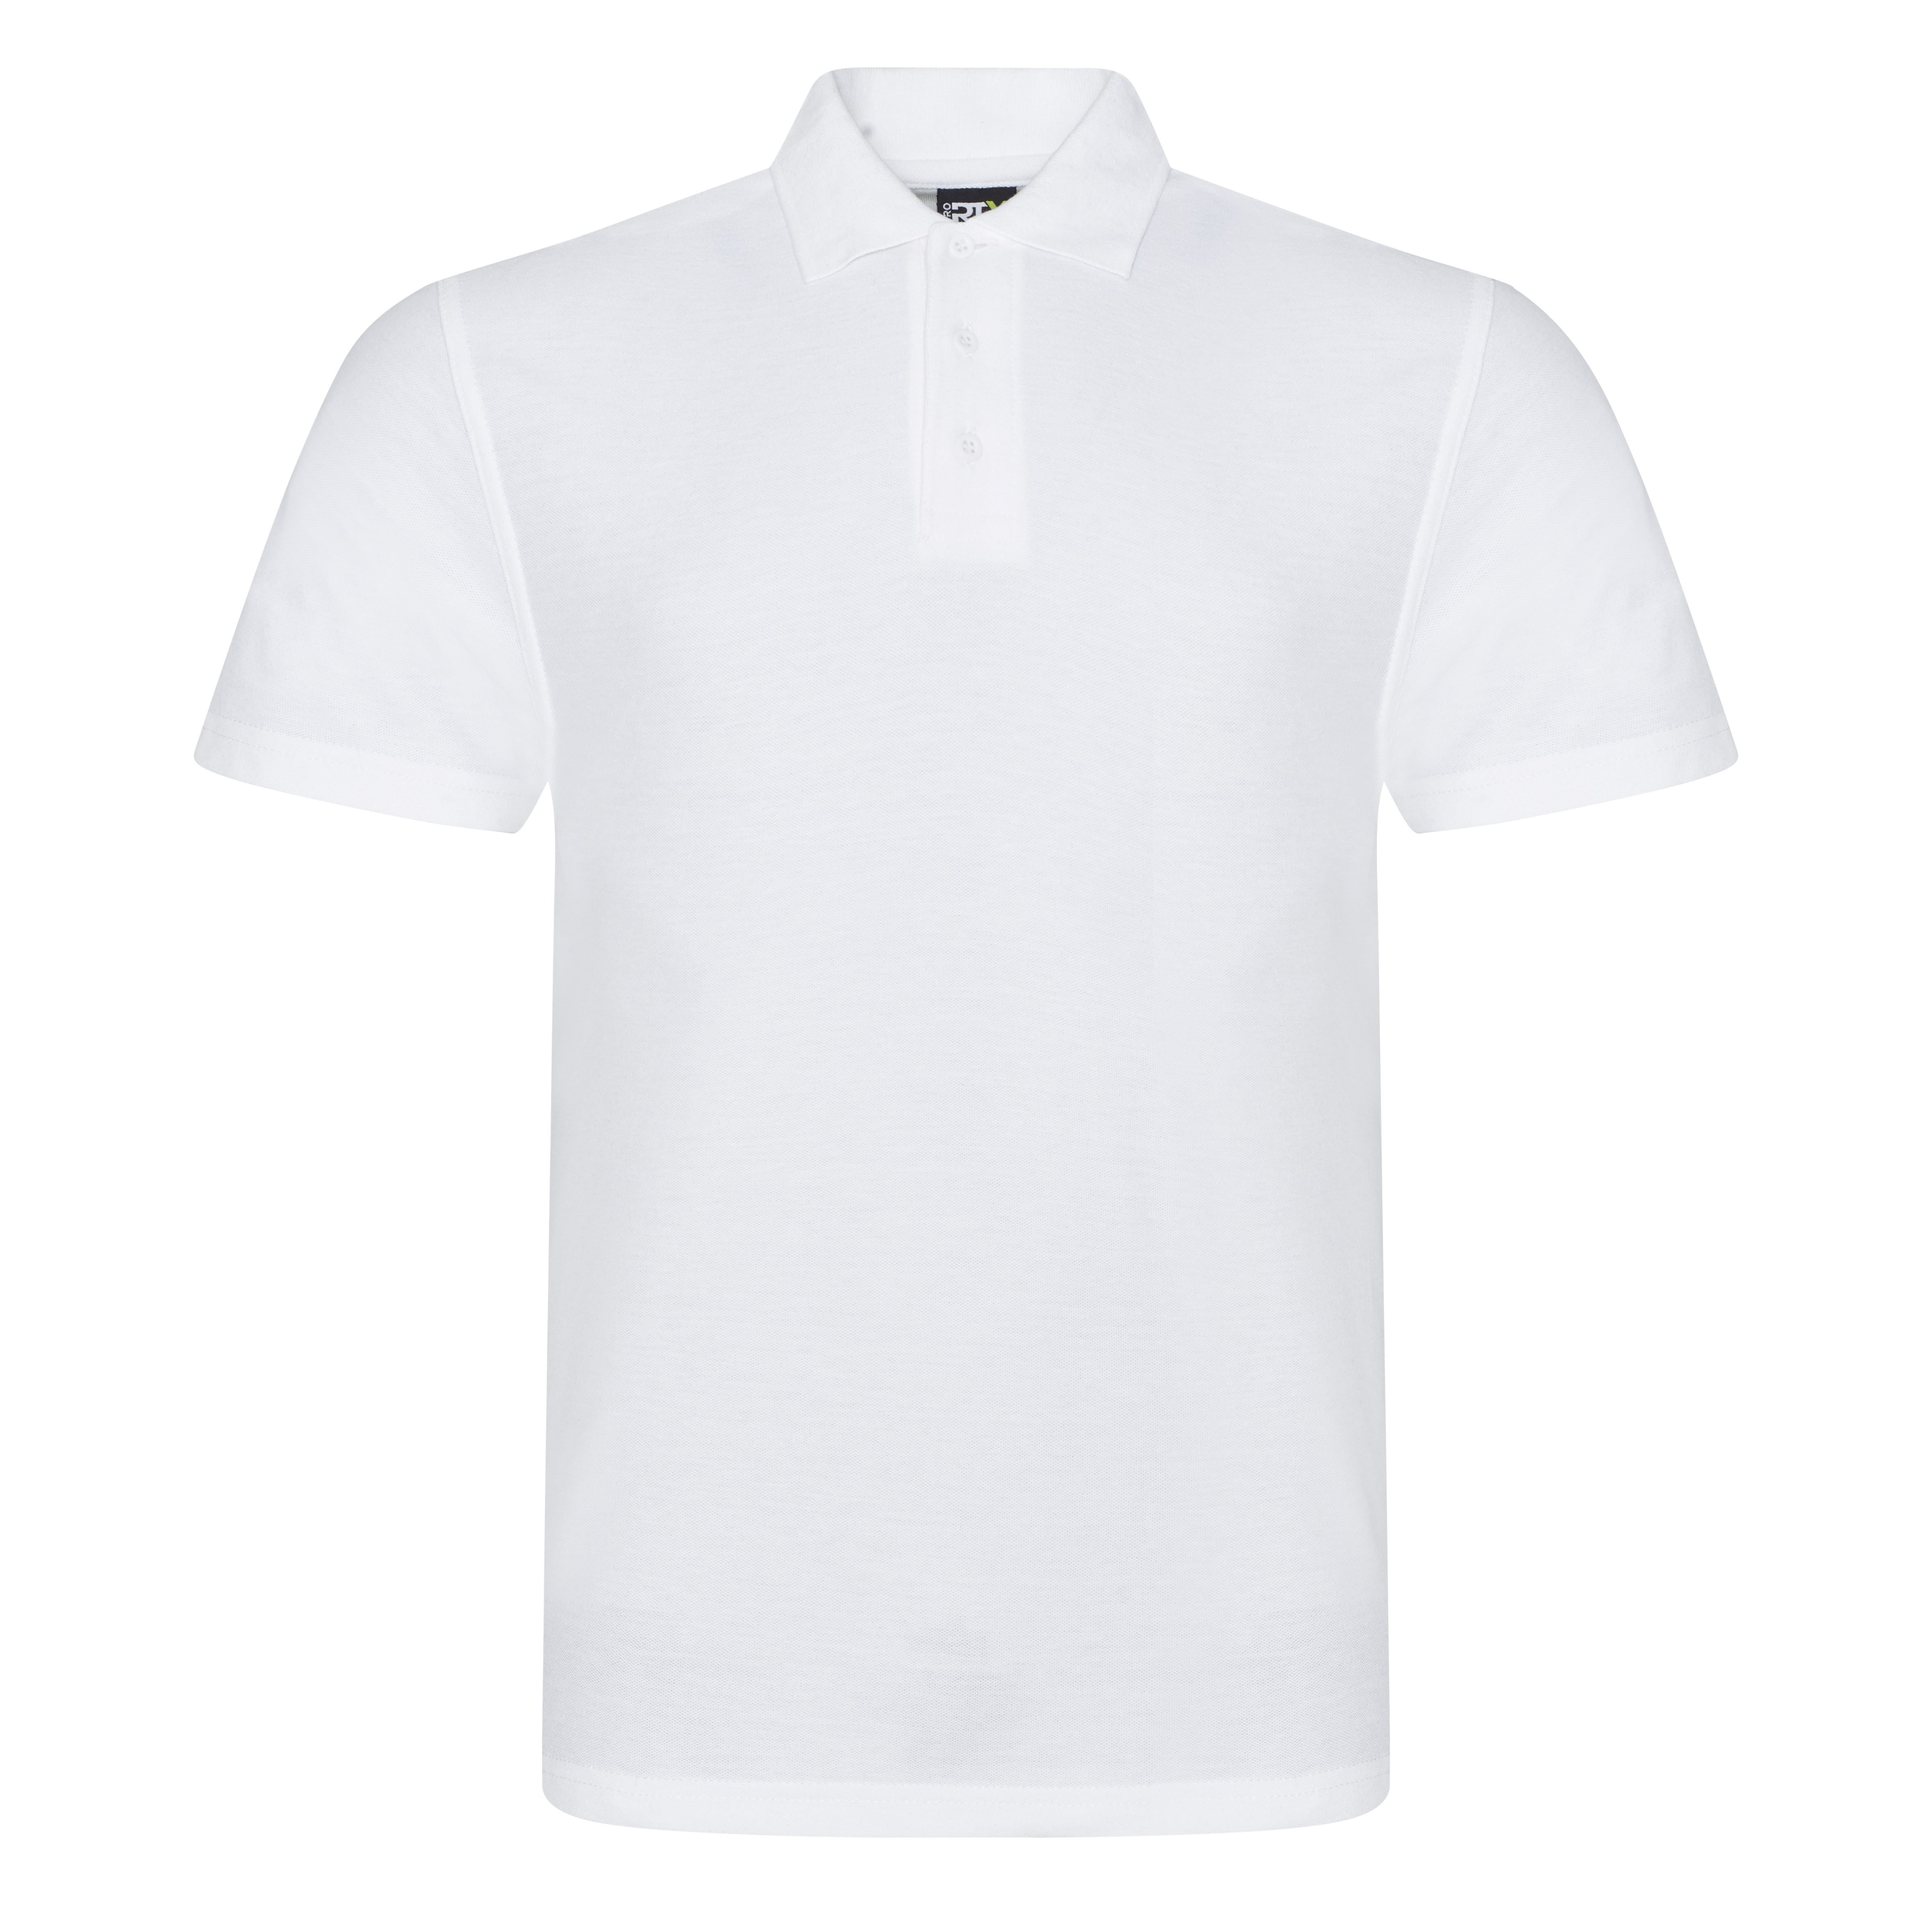 ax-httpswebsystems.s3.amazonaws.comtmp_for_downloadpro-polo-white.jpg